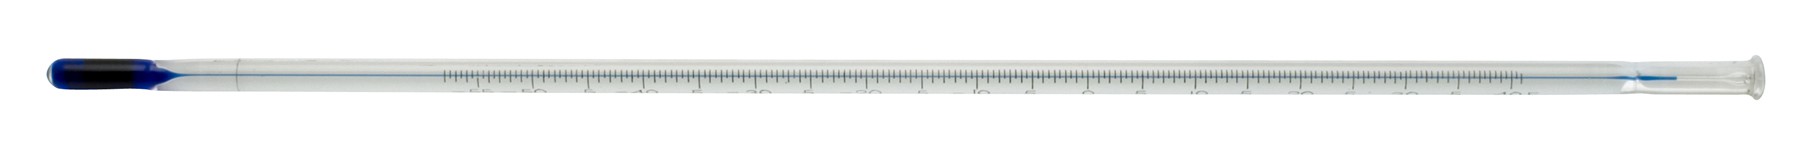 H-B DURAC Plus ASTM Like Liquid-In-Glass Thermometer; 14C / Wax Melting Point, 79mm Immersion, 38 to 82C, Organic Liquid Fill